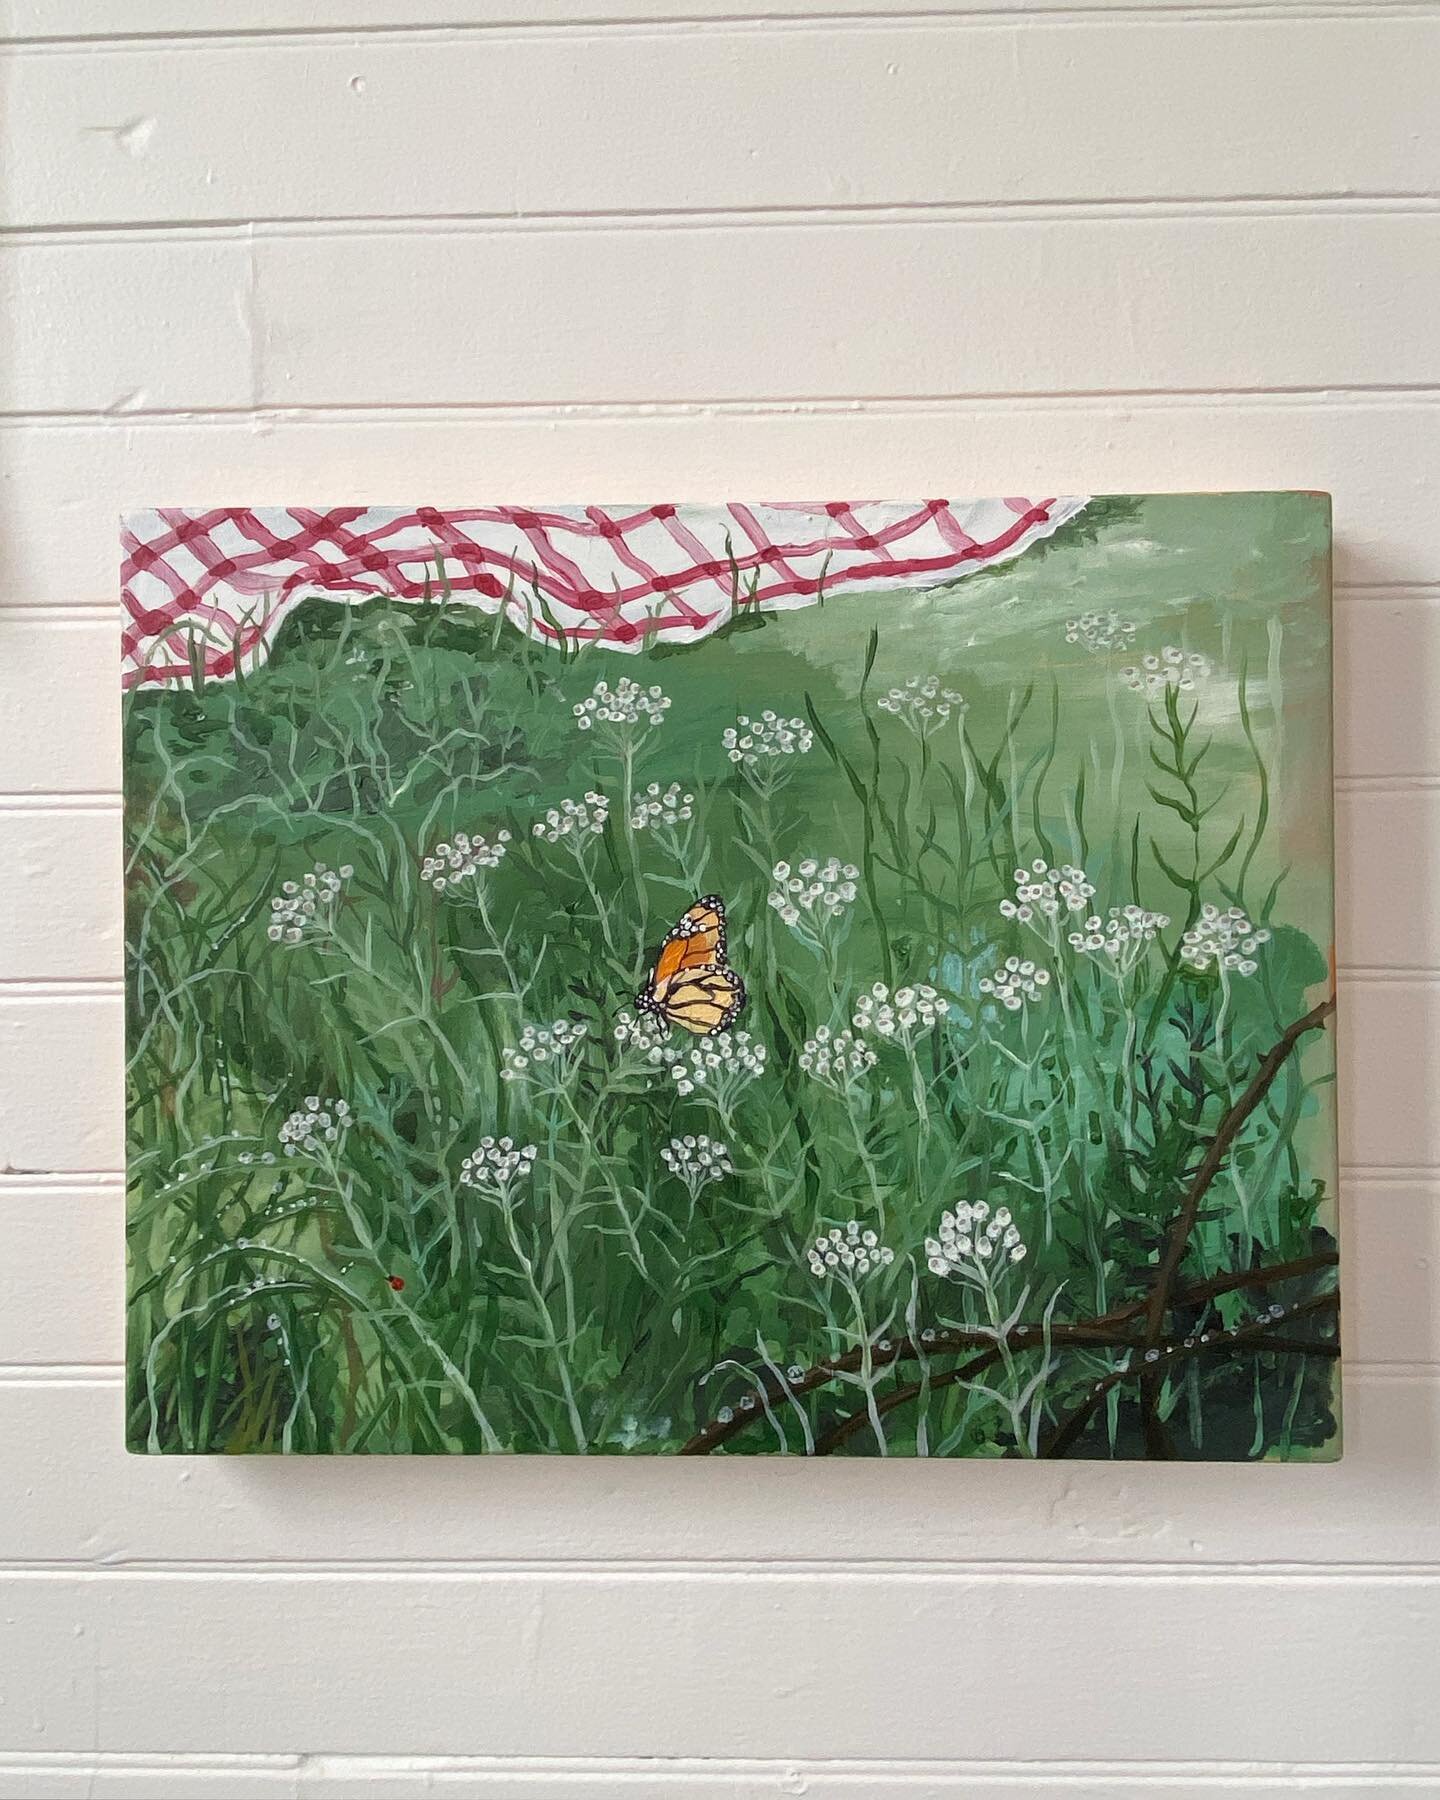 a monarch in a late fall meadow
is a love story 

&ldquo;winged communication&rdquo;, acrylic on canvas 🦋🦋🦋

excited to have this piece in an upcoming exhibit on monarchs at the @marinartandgarden center, opening this Saturday 🦋🌿 Put on by @west